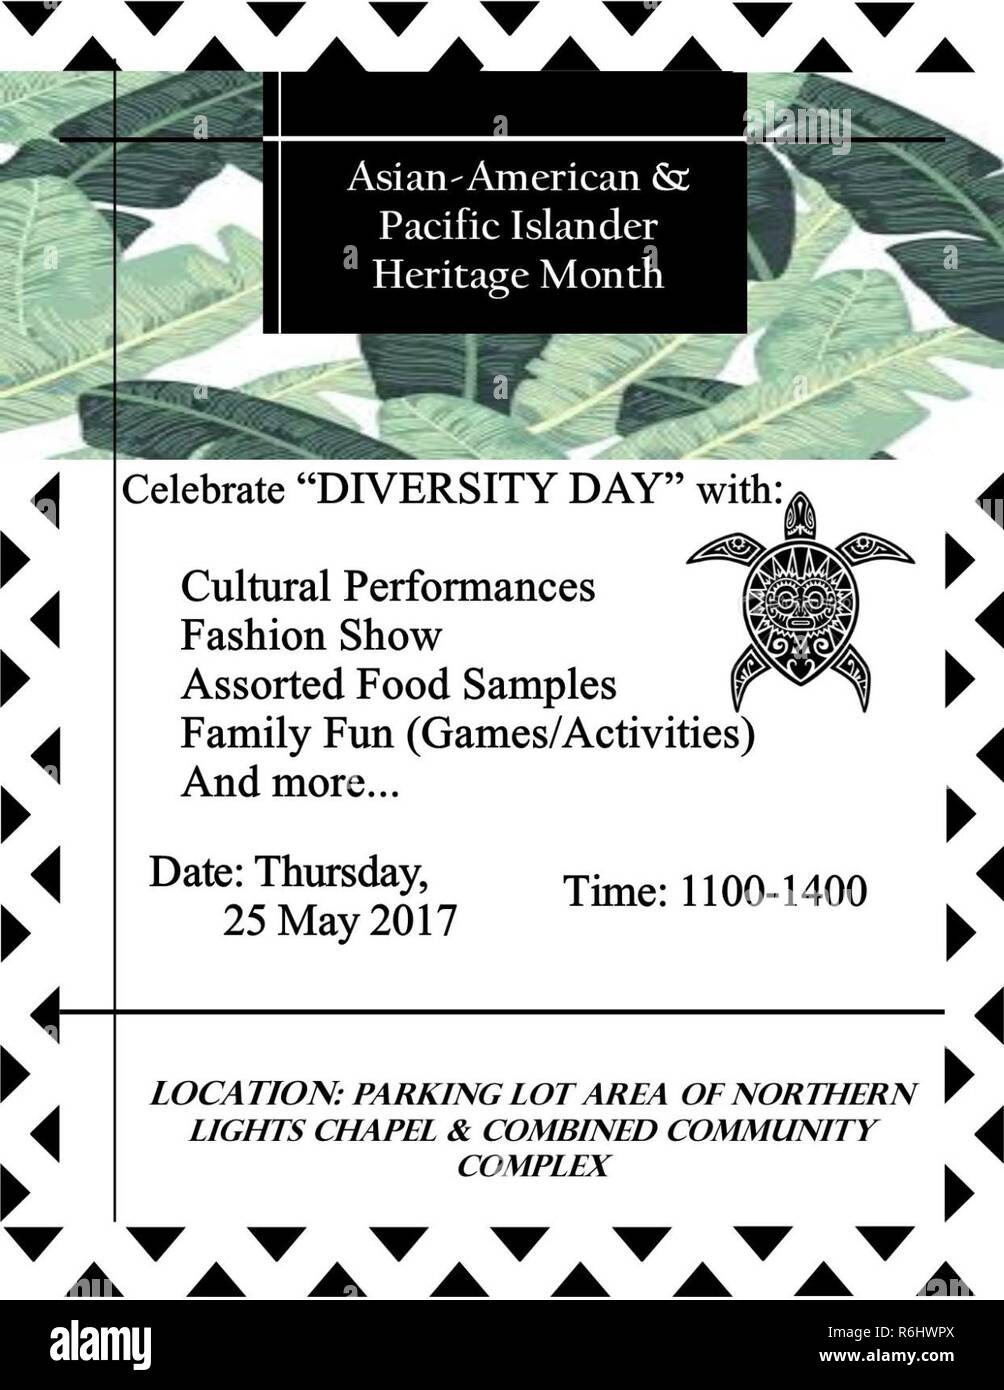 Diversity Day is scheduled to occur at the Combined Community Complex parking lot on Minot Air Force Base, N.D., May 25, 2017, from 11 a.m. to 2 p.m. During the event, there will be food sampling, performances, a fashion show and kids activities. Stock Photo